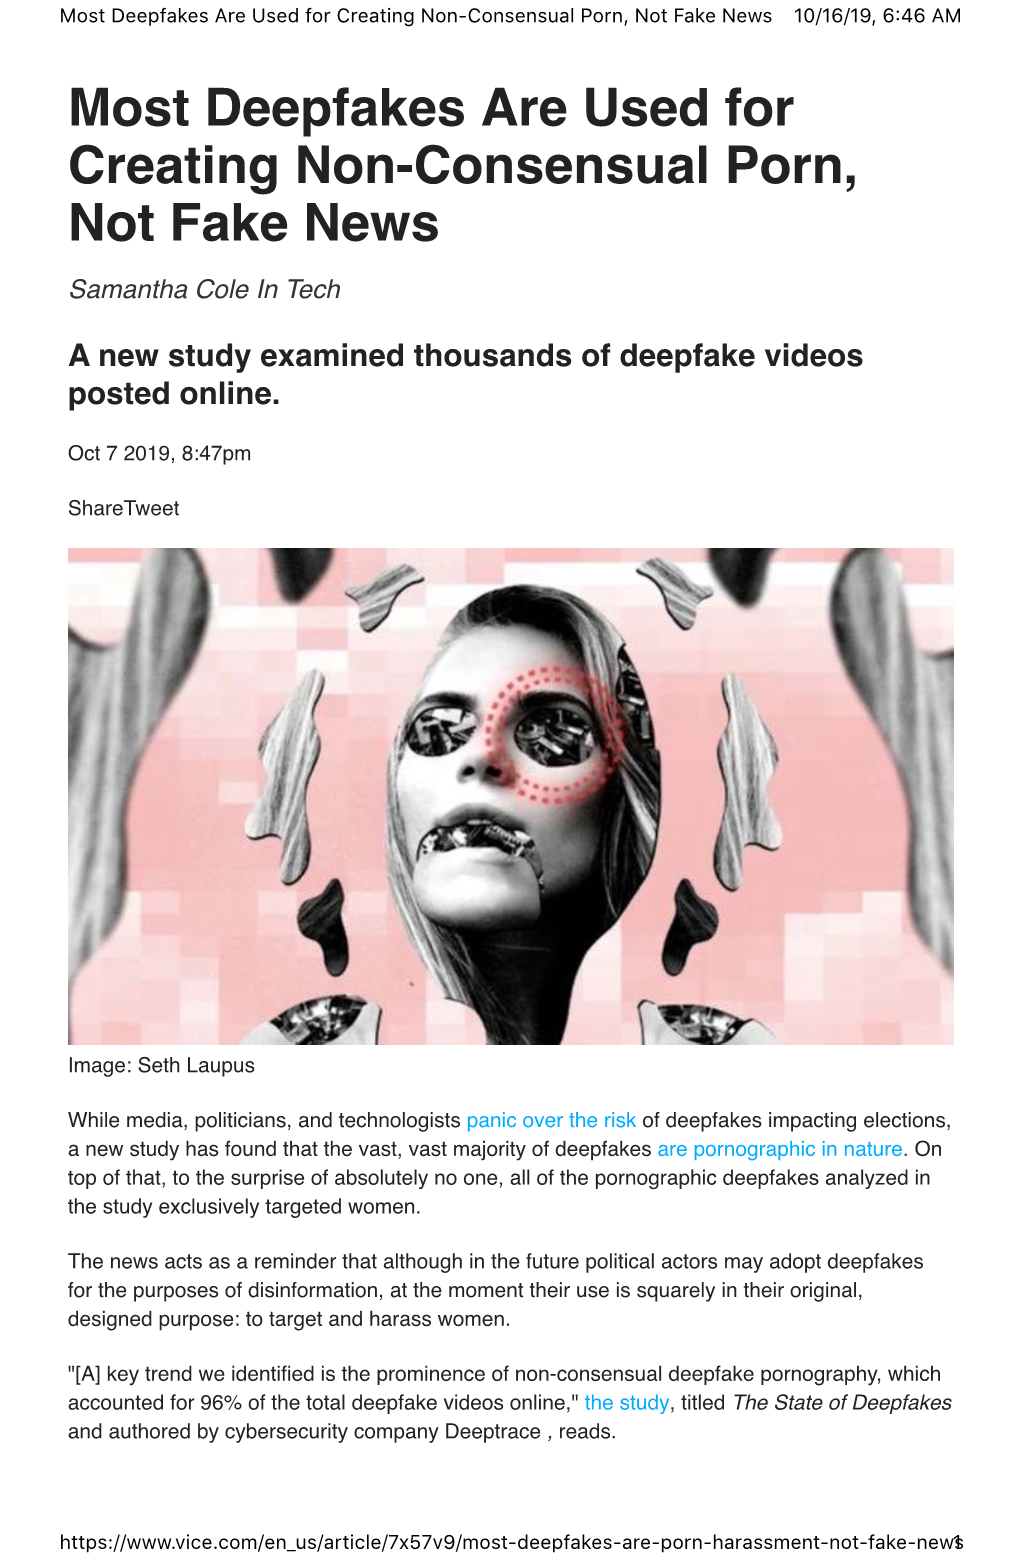 Most Deepfakes Are Used for Creating Non-Consensual Porn, Not Fake News 10/16/19, 6:46 AM